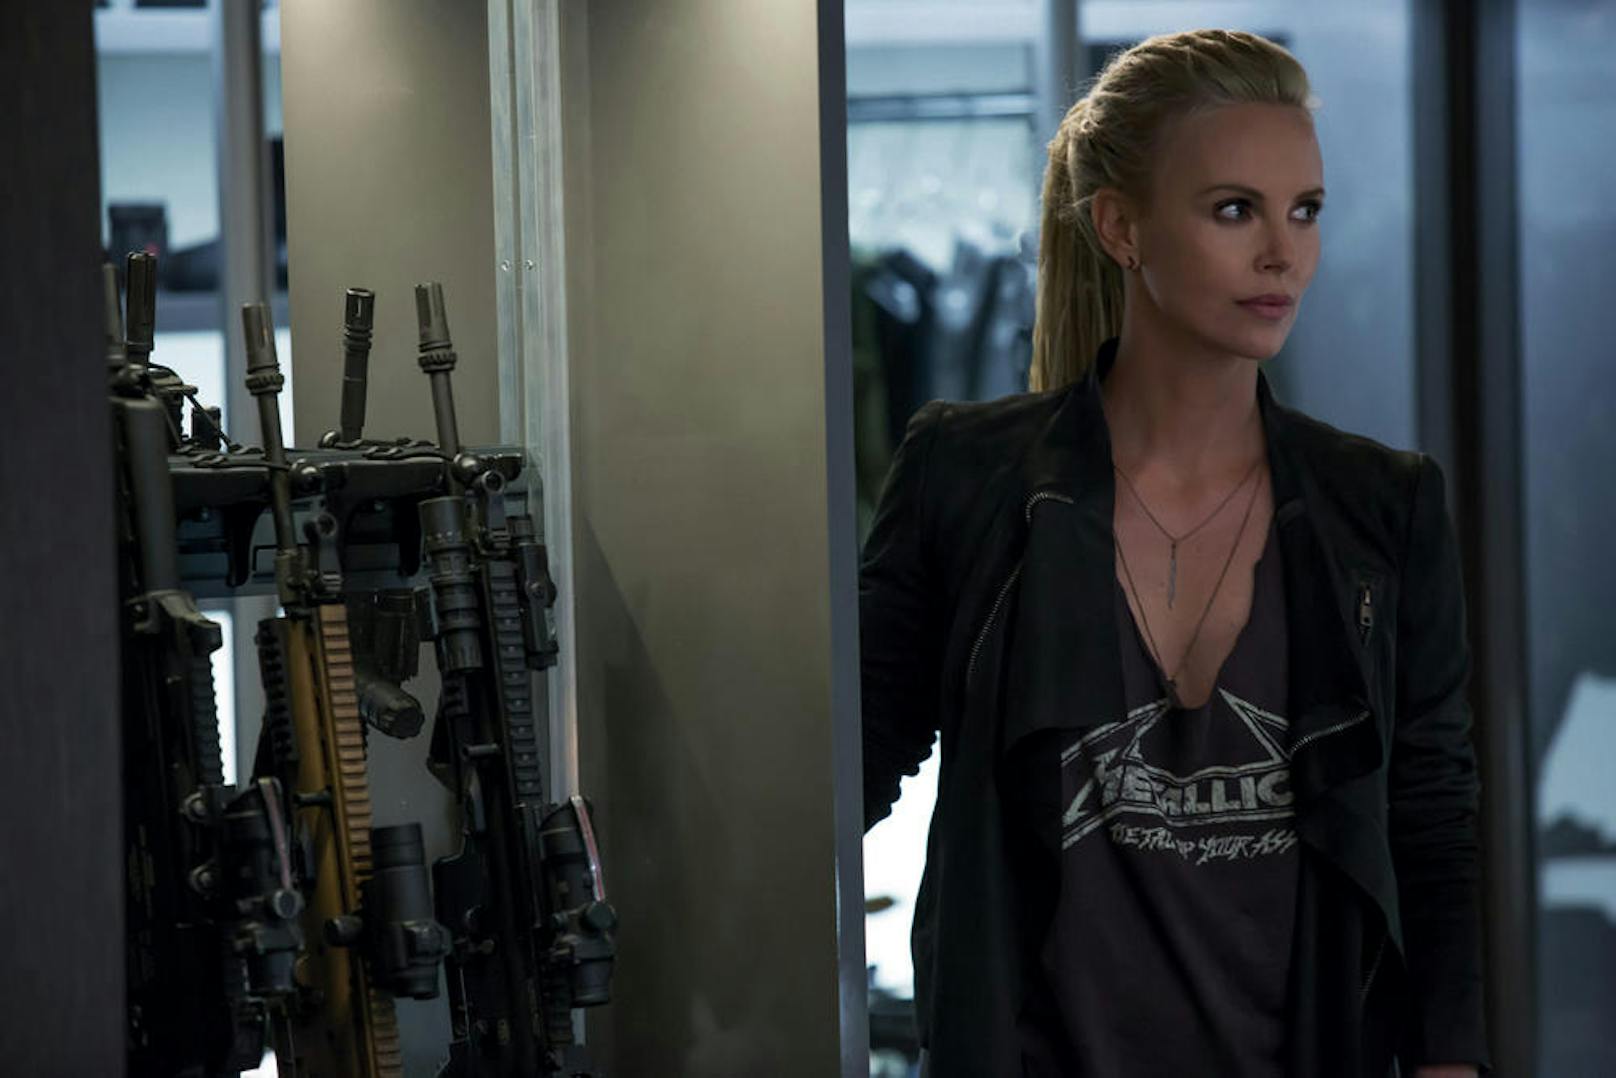 Charlize Theron in "Fast & Furious 8"